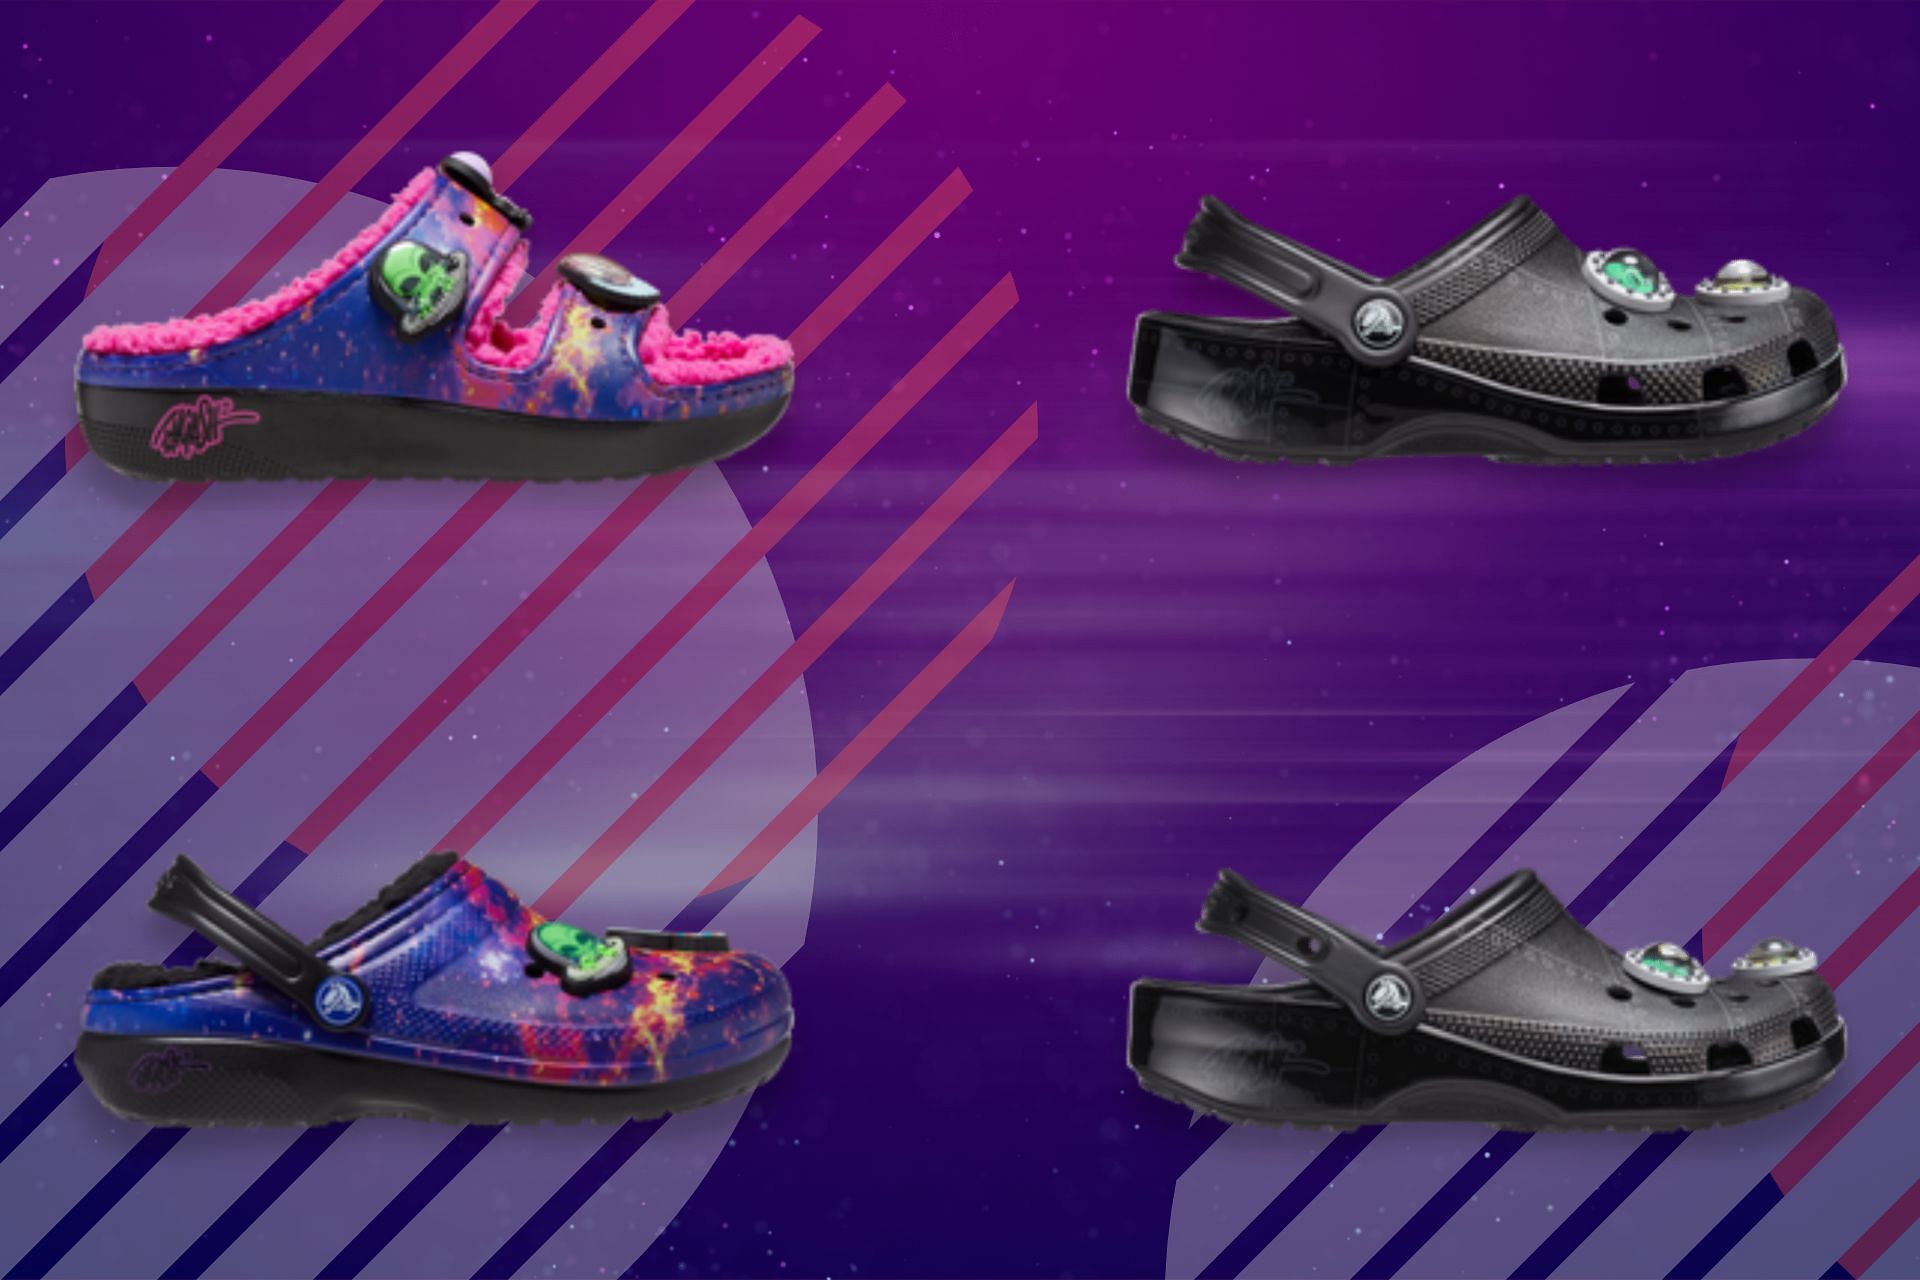 The newly released four-piece Crocs x Ron English footwear collection (Image via Sportskeeda)